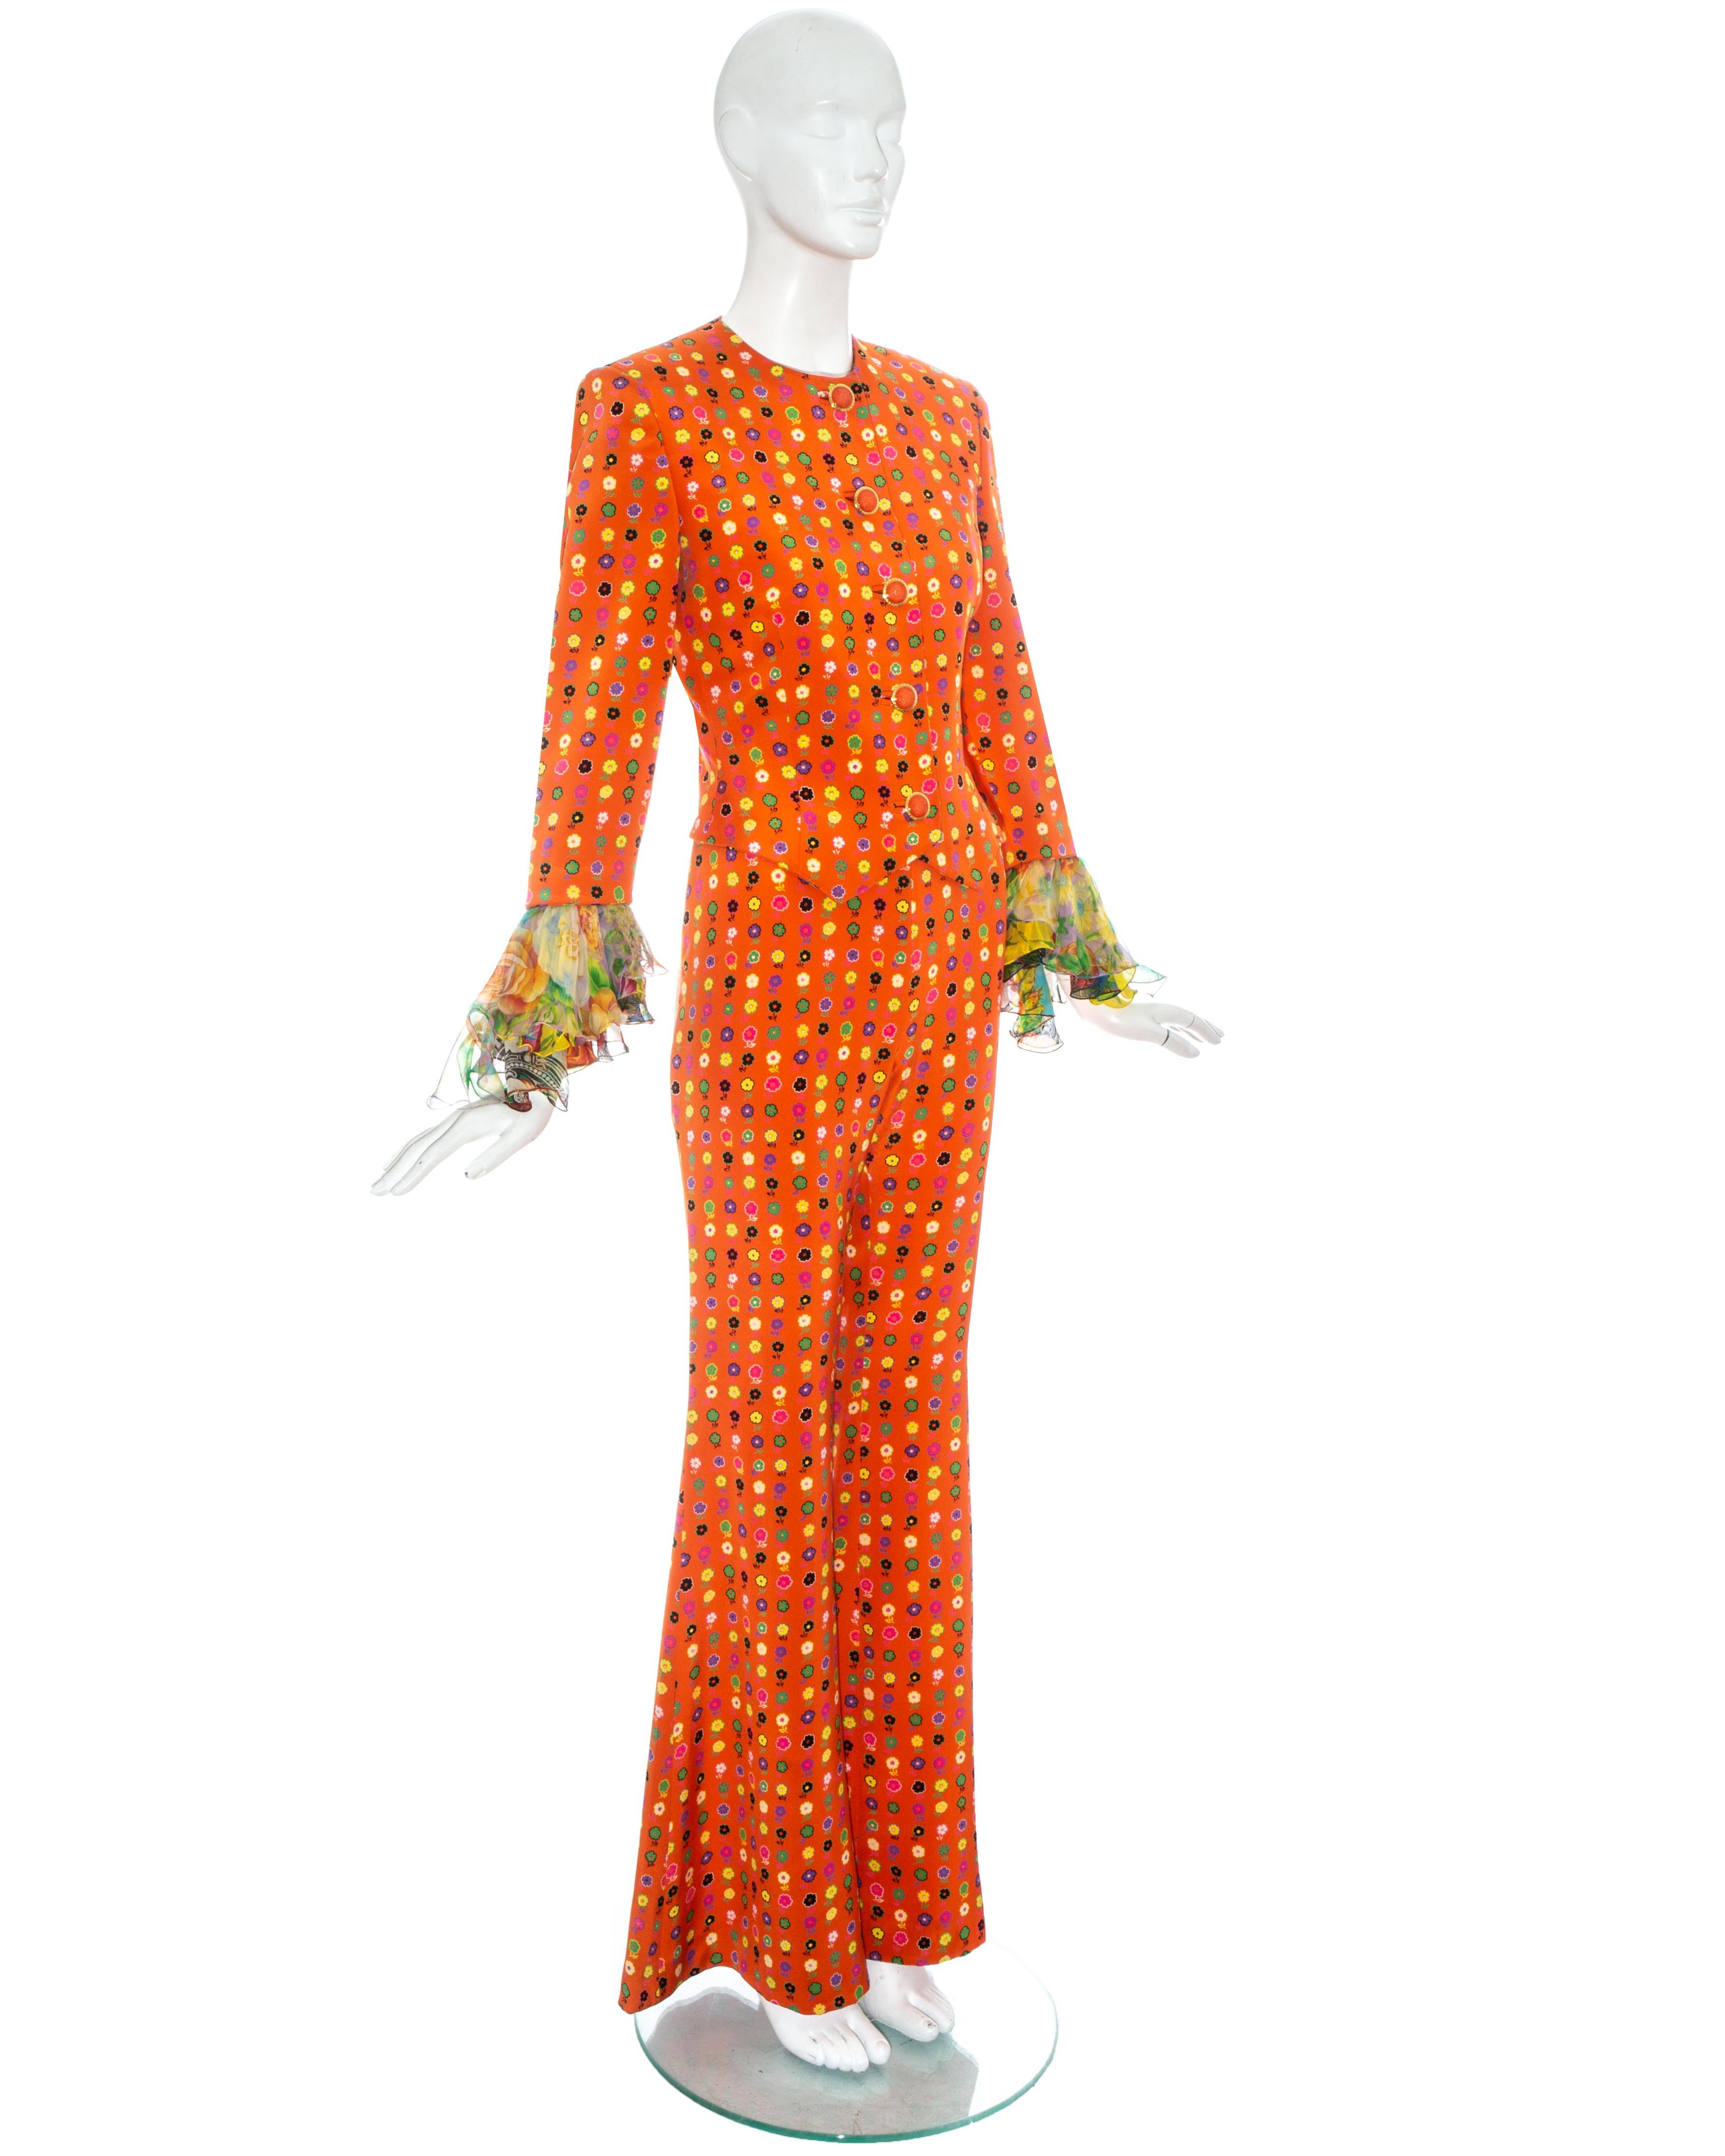 Orange Gianni Versace orange floral printed silk flared pant suit, ss 1993 For Sale